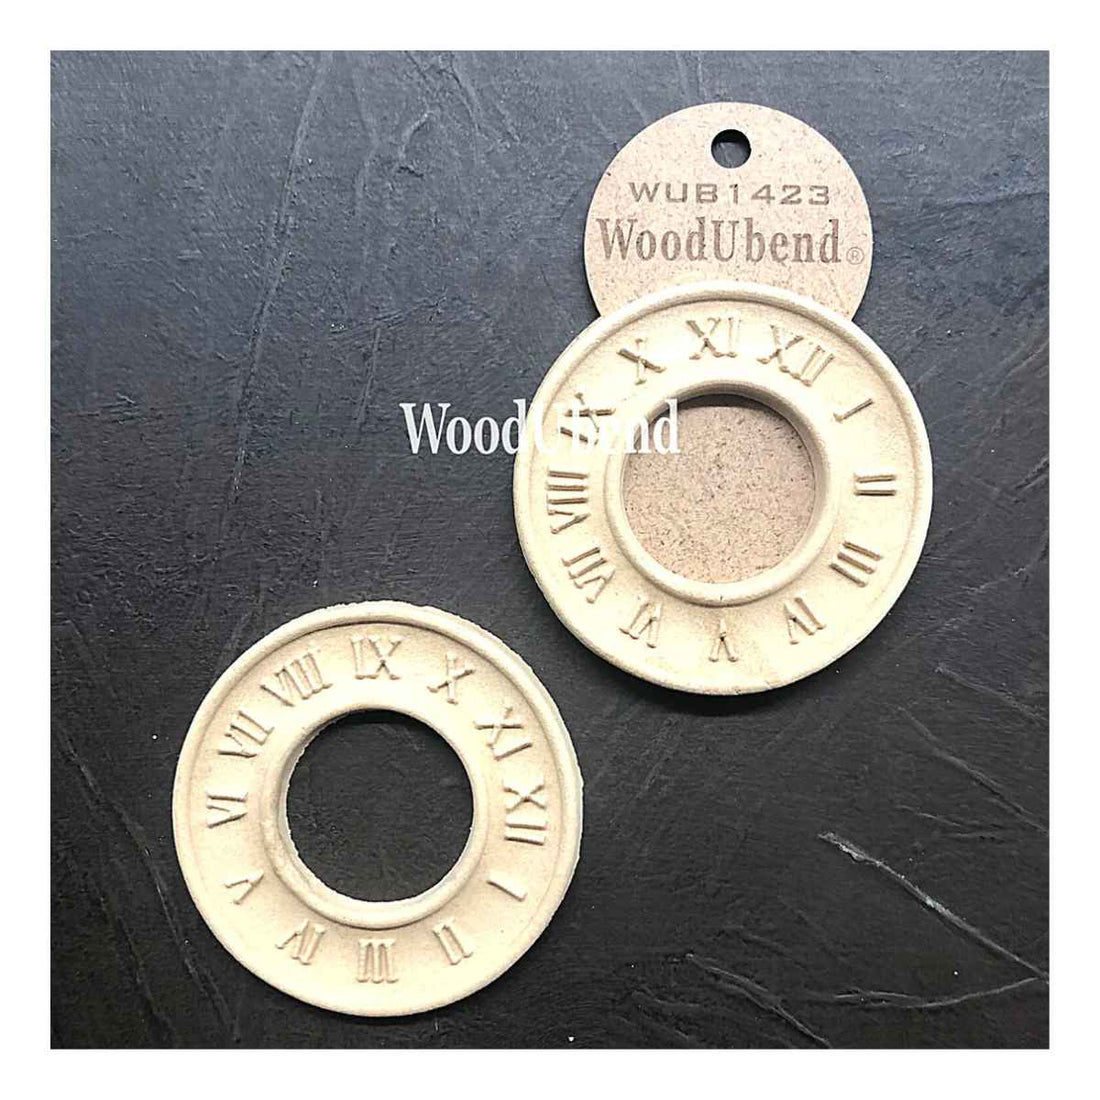 Pack of Two Round Roman Numeral Clocks by woodubend